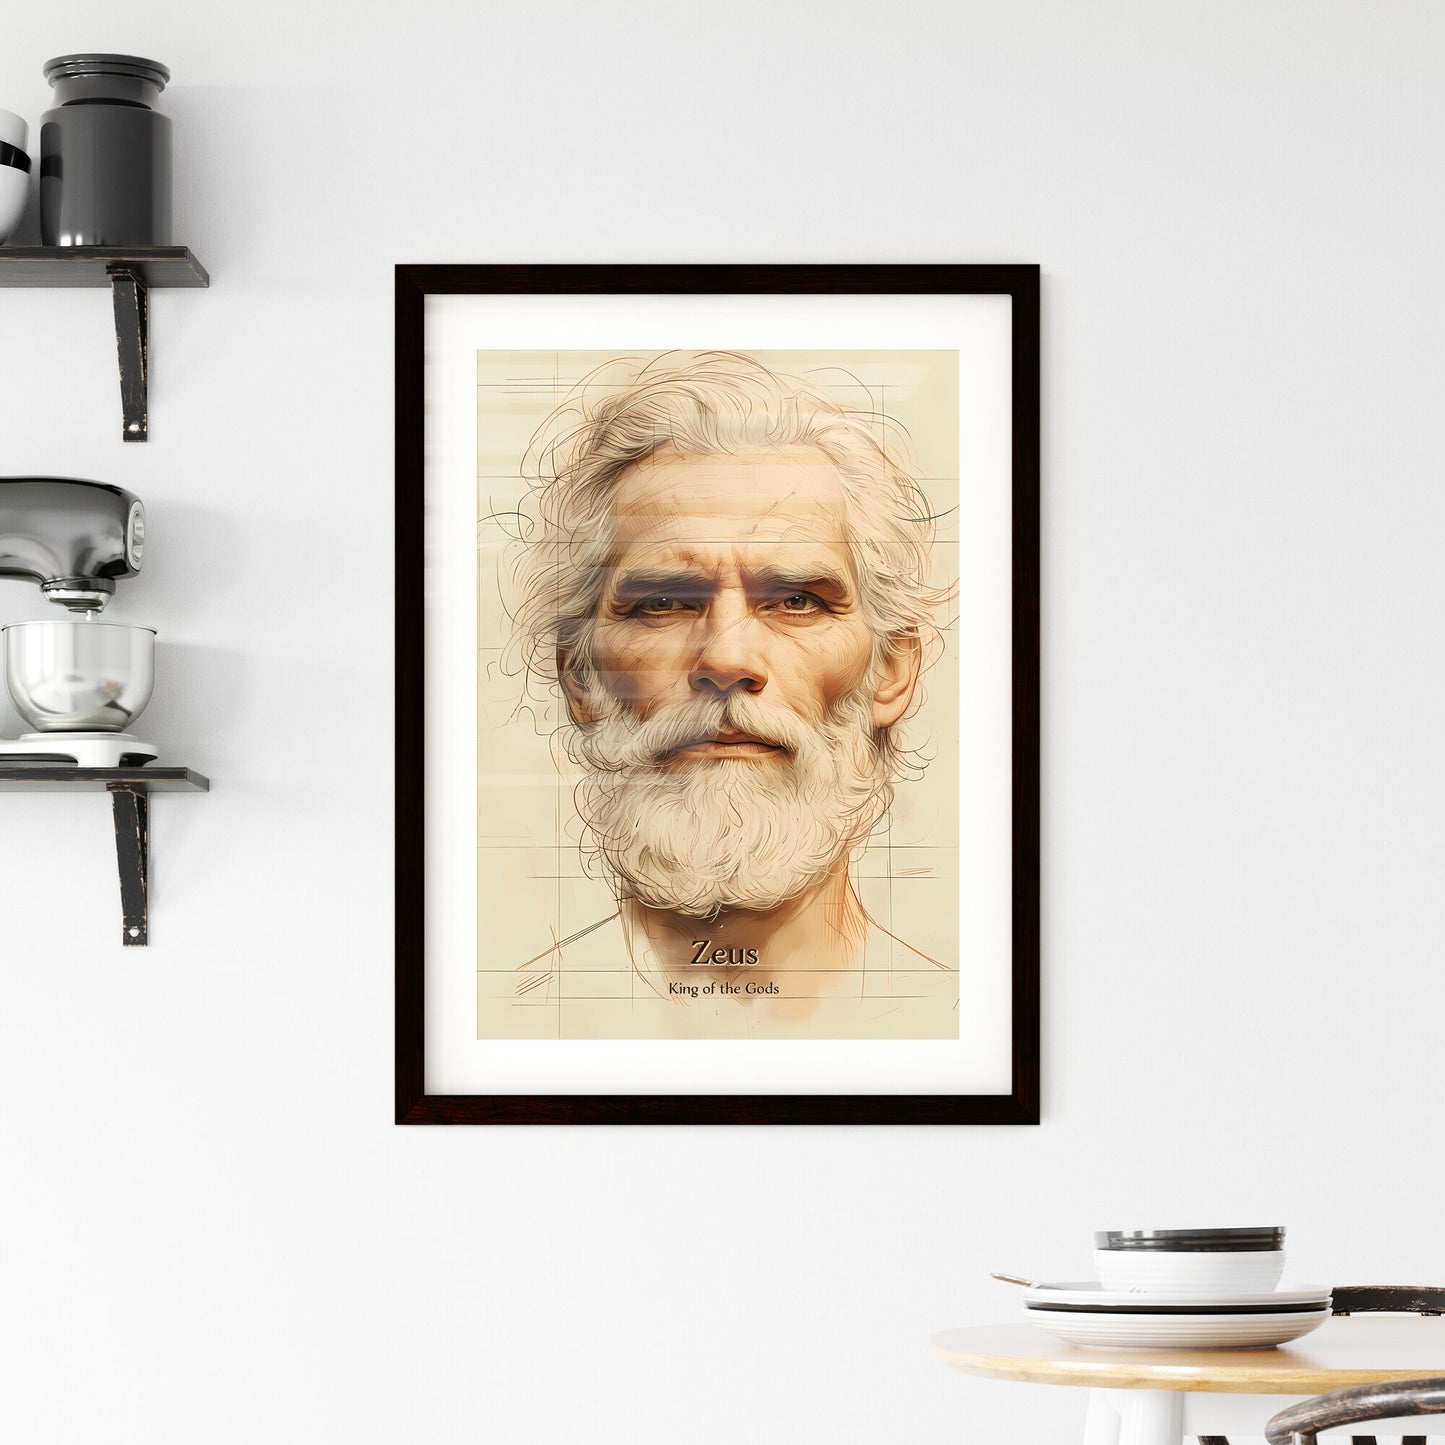 Zeus, King of the Gods, A Poster of a drawing of a man with a beard Default Title